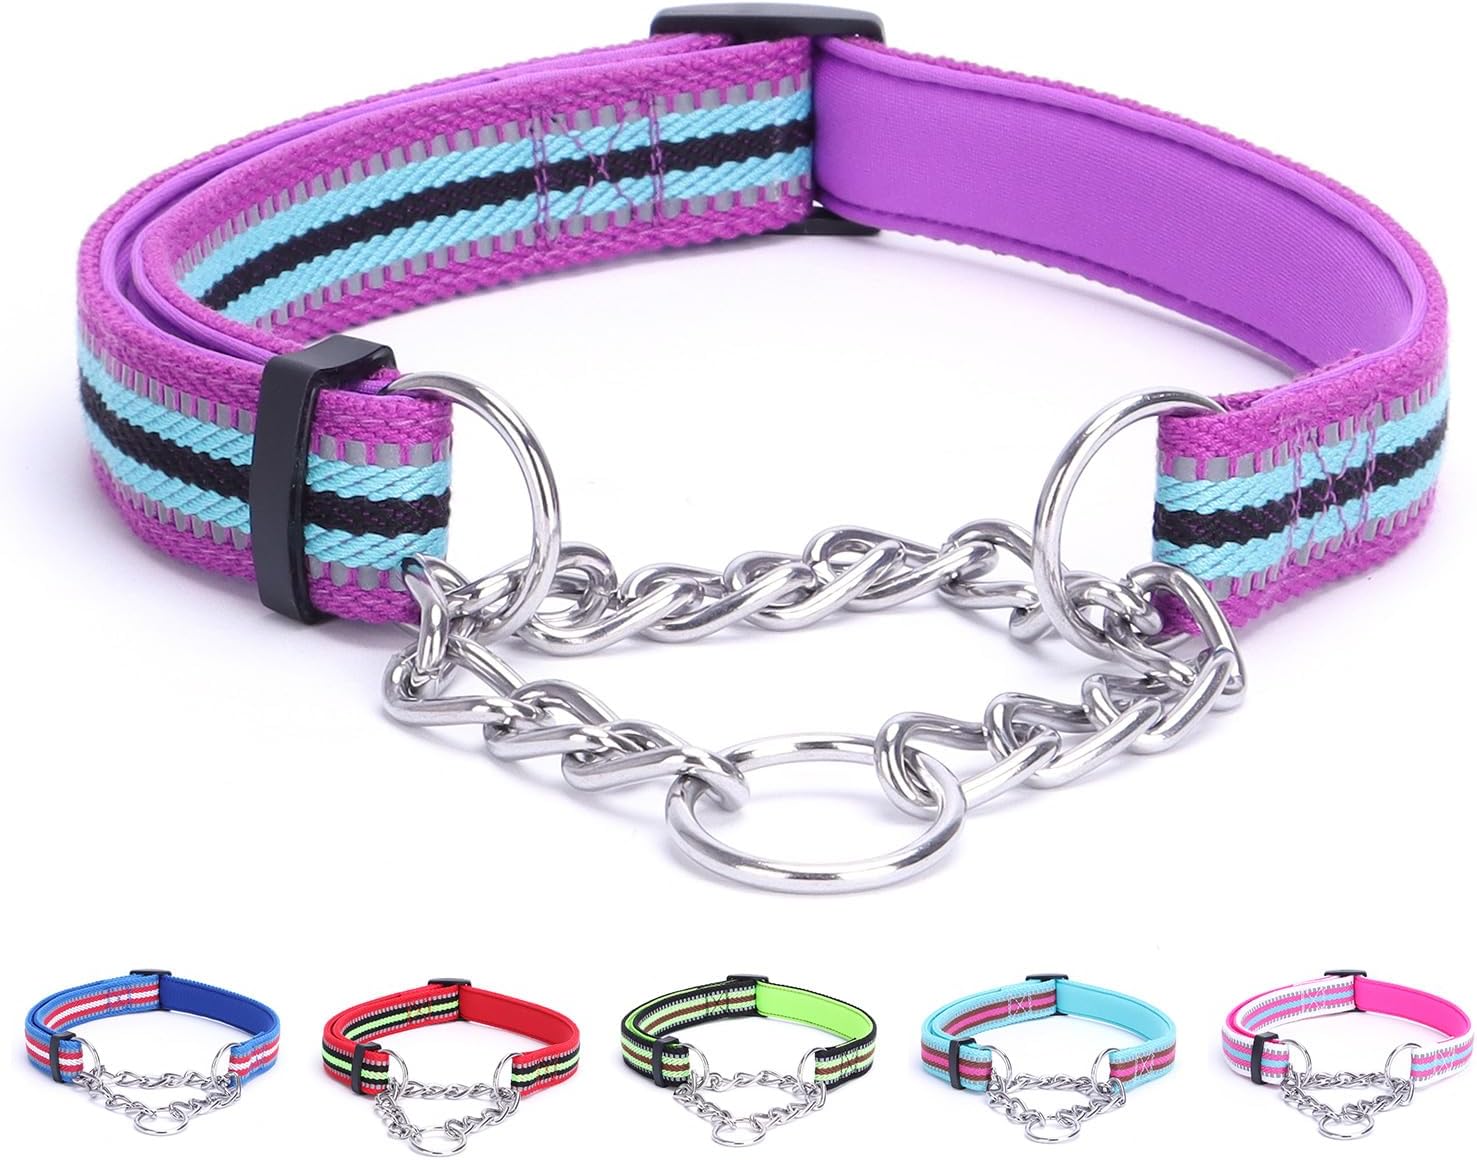 Reflective Martingale Dog Collars, Adjustable Soft Neoprene Padded Breathable Nylon Pet Collar for Puppy, Medium and Large Dogs,Purple,XL